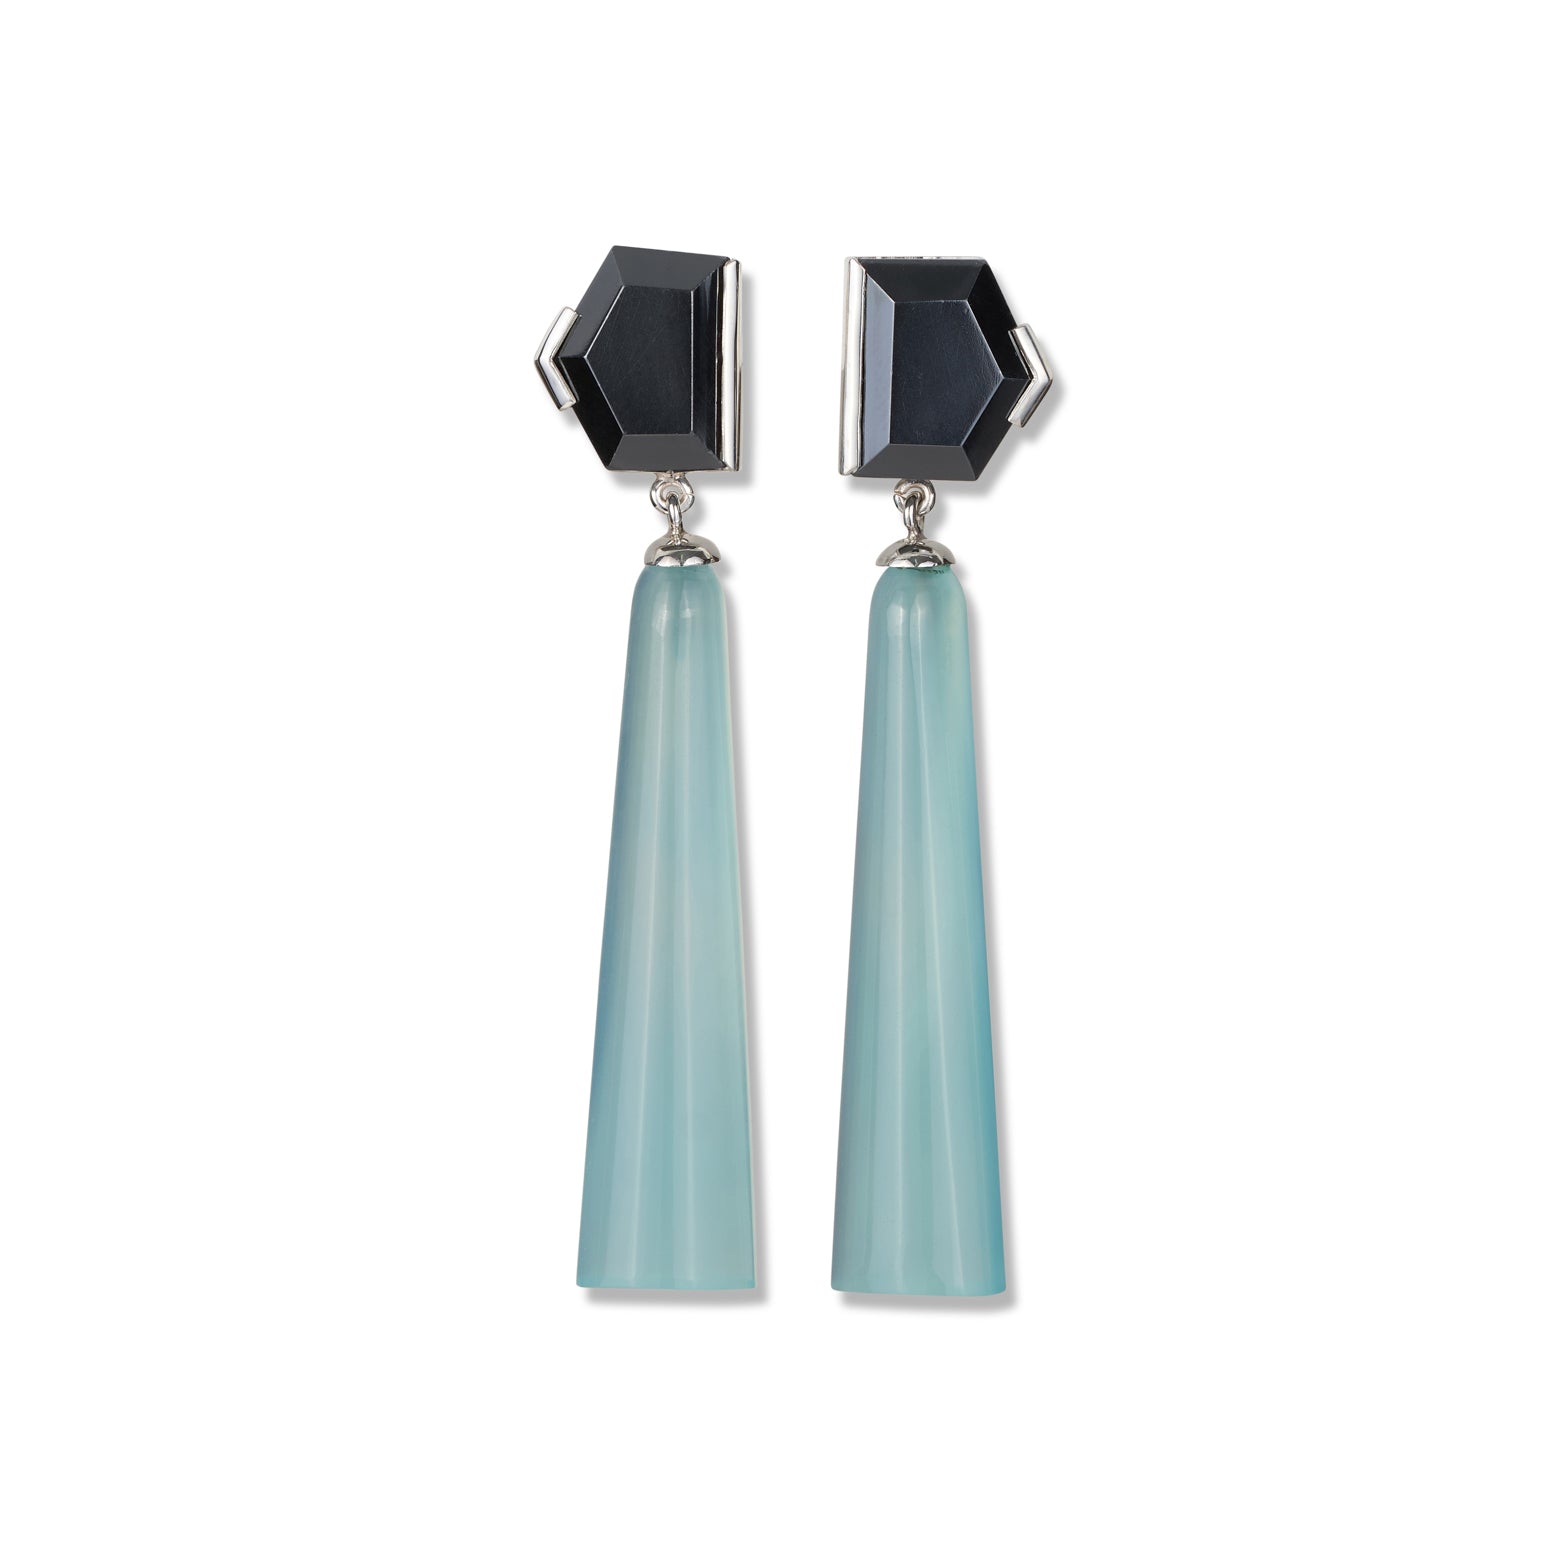 Kelly Woodcroft brisbane made earrings Hematite dangles in black and blue stones with silver detailing.